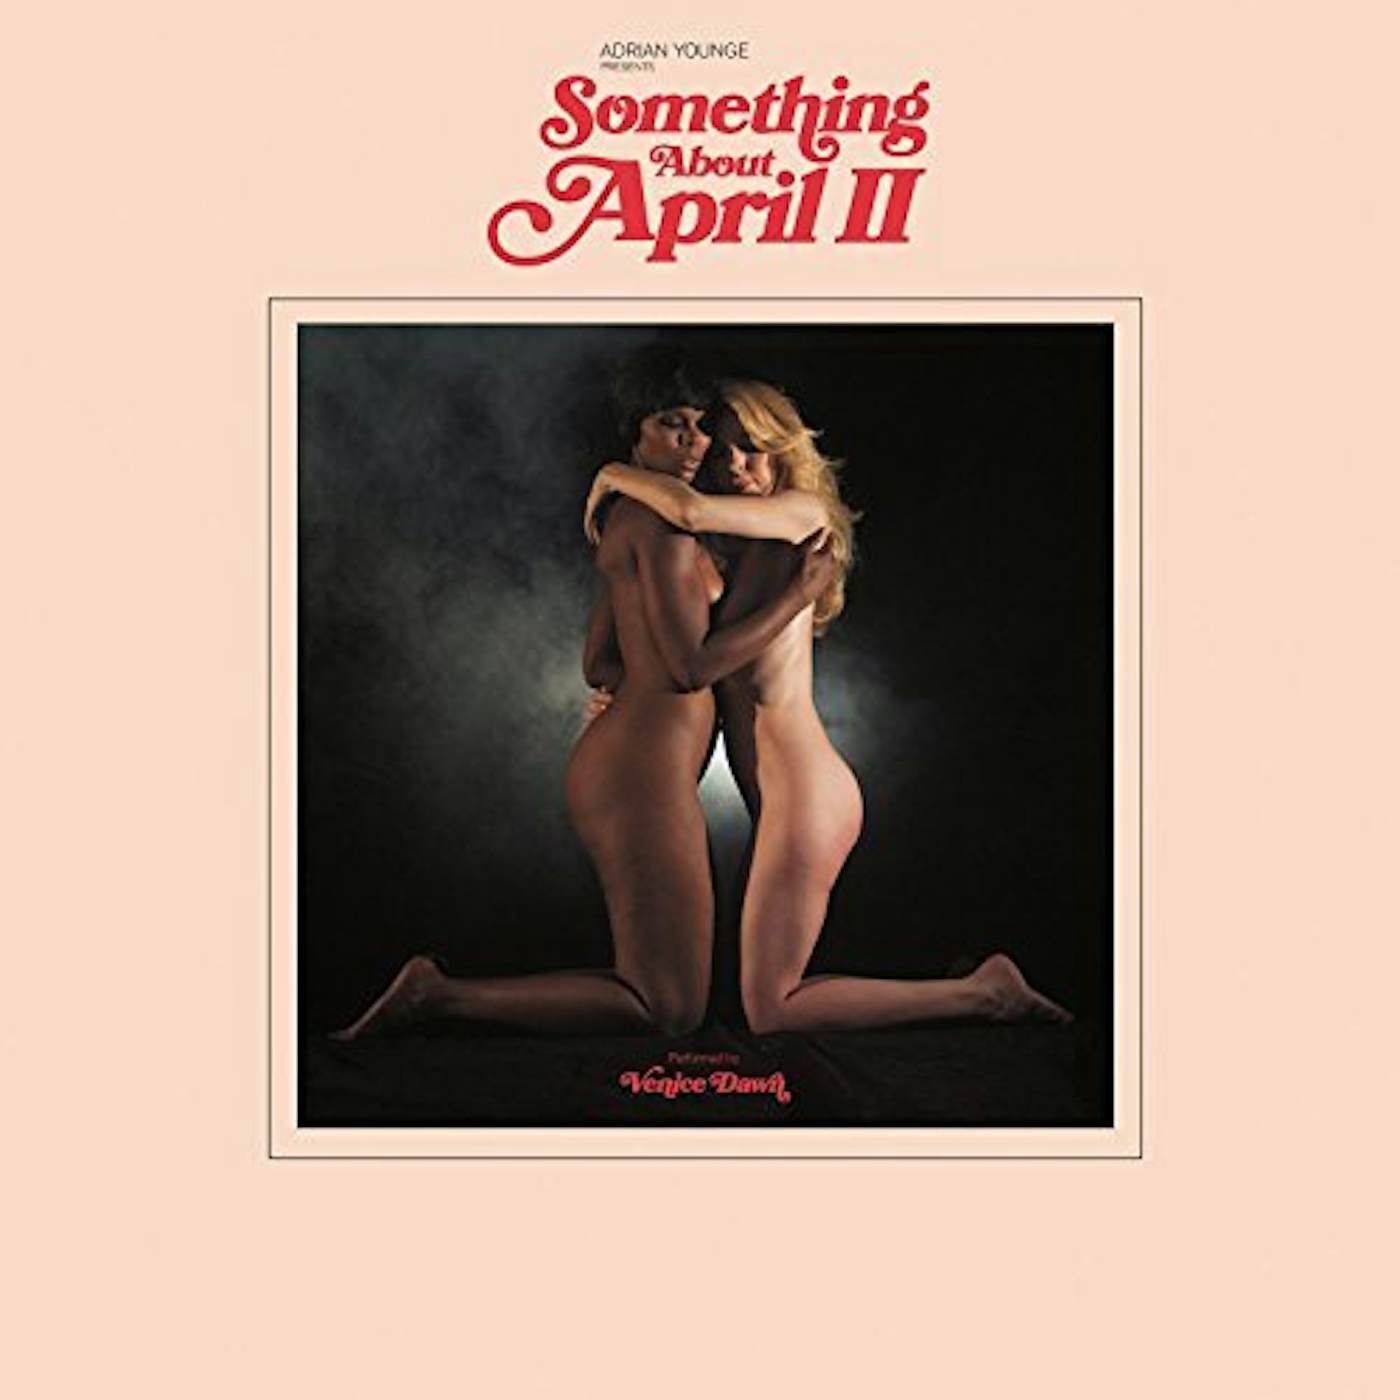 Adrian Younge THERE'S SOMETHING ABOUT APRIL II CD